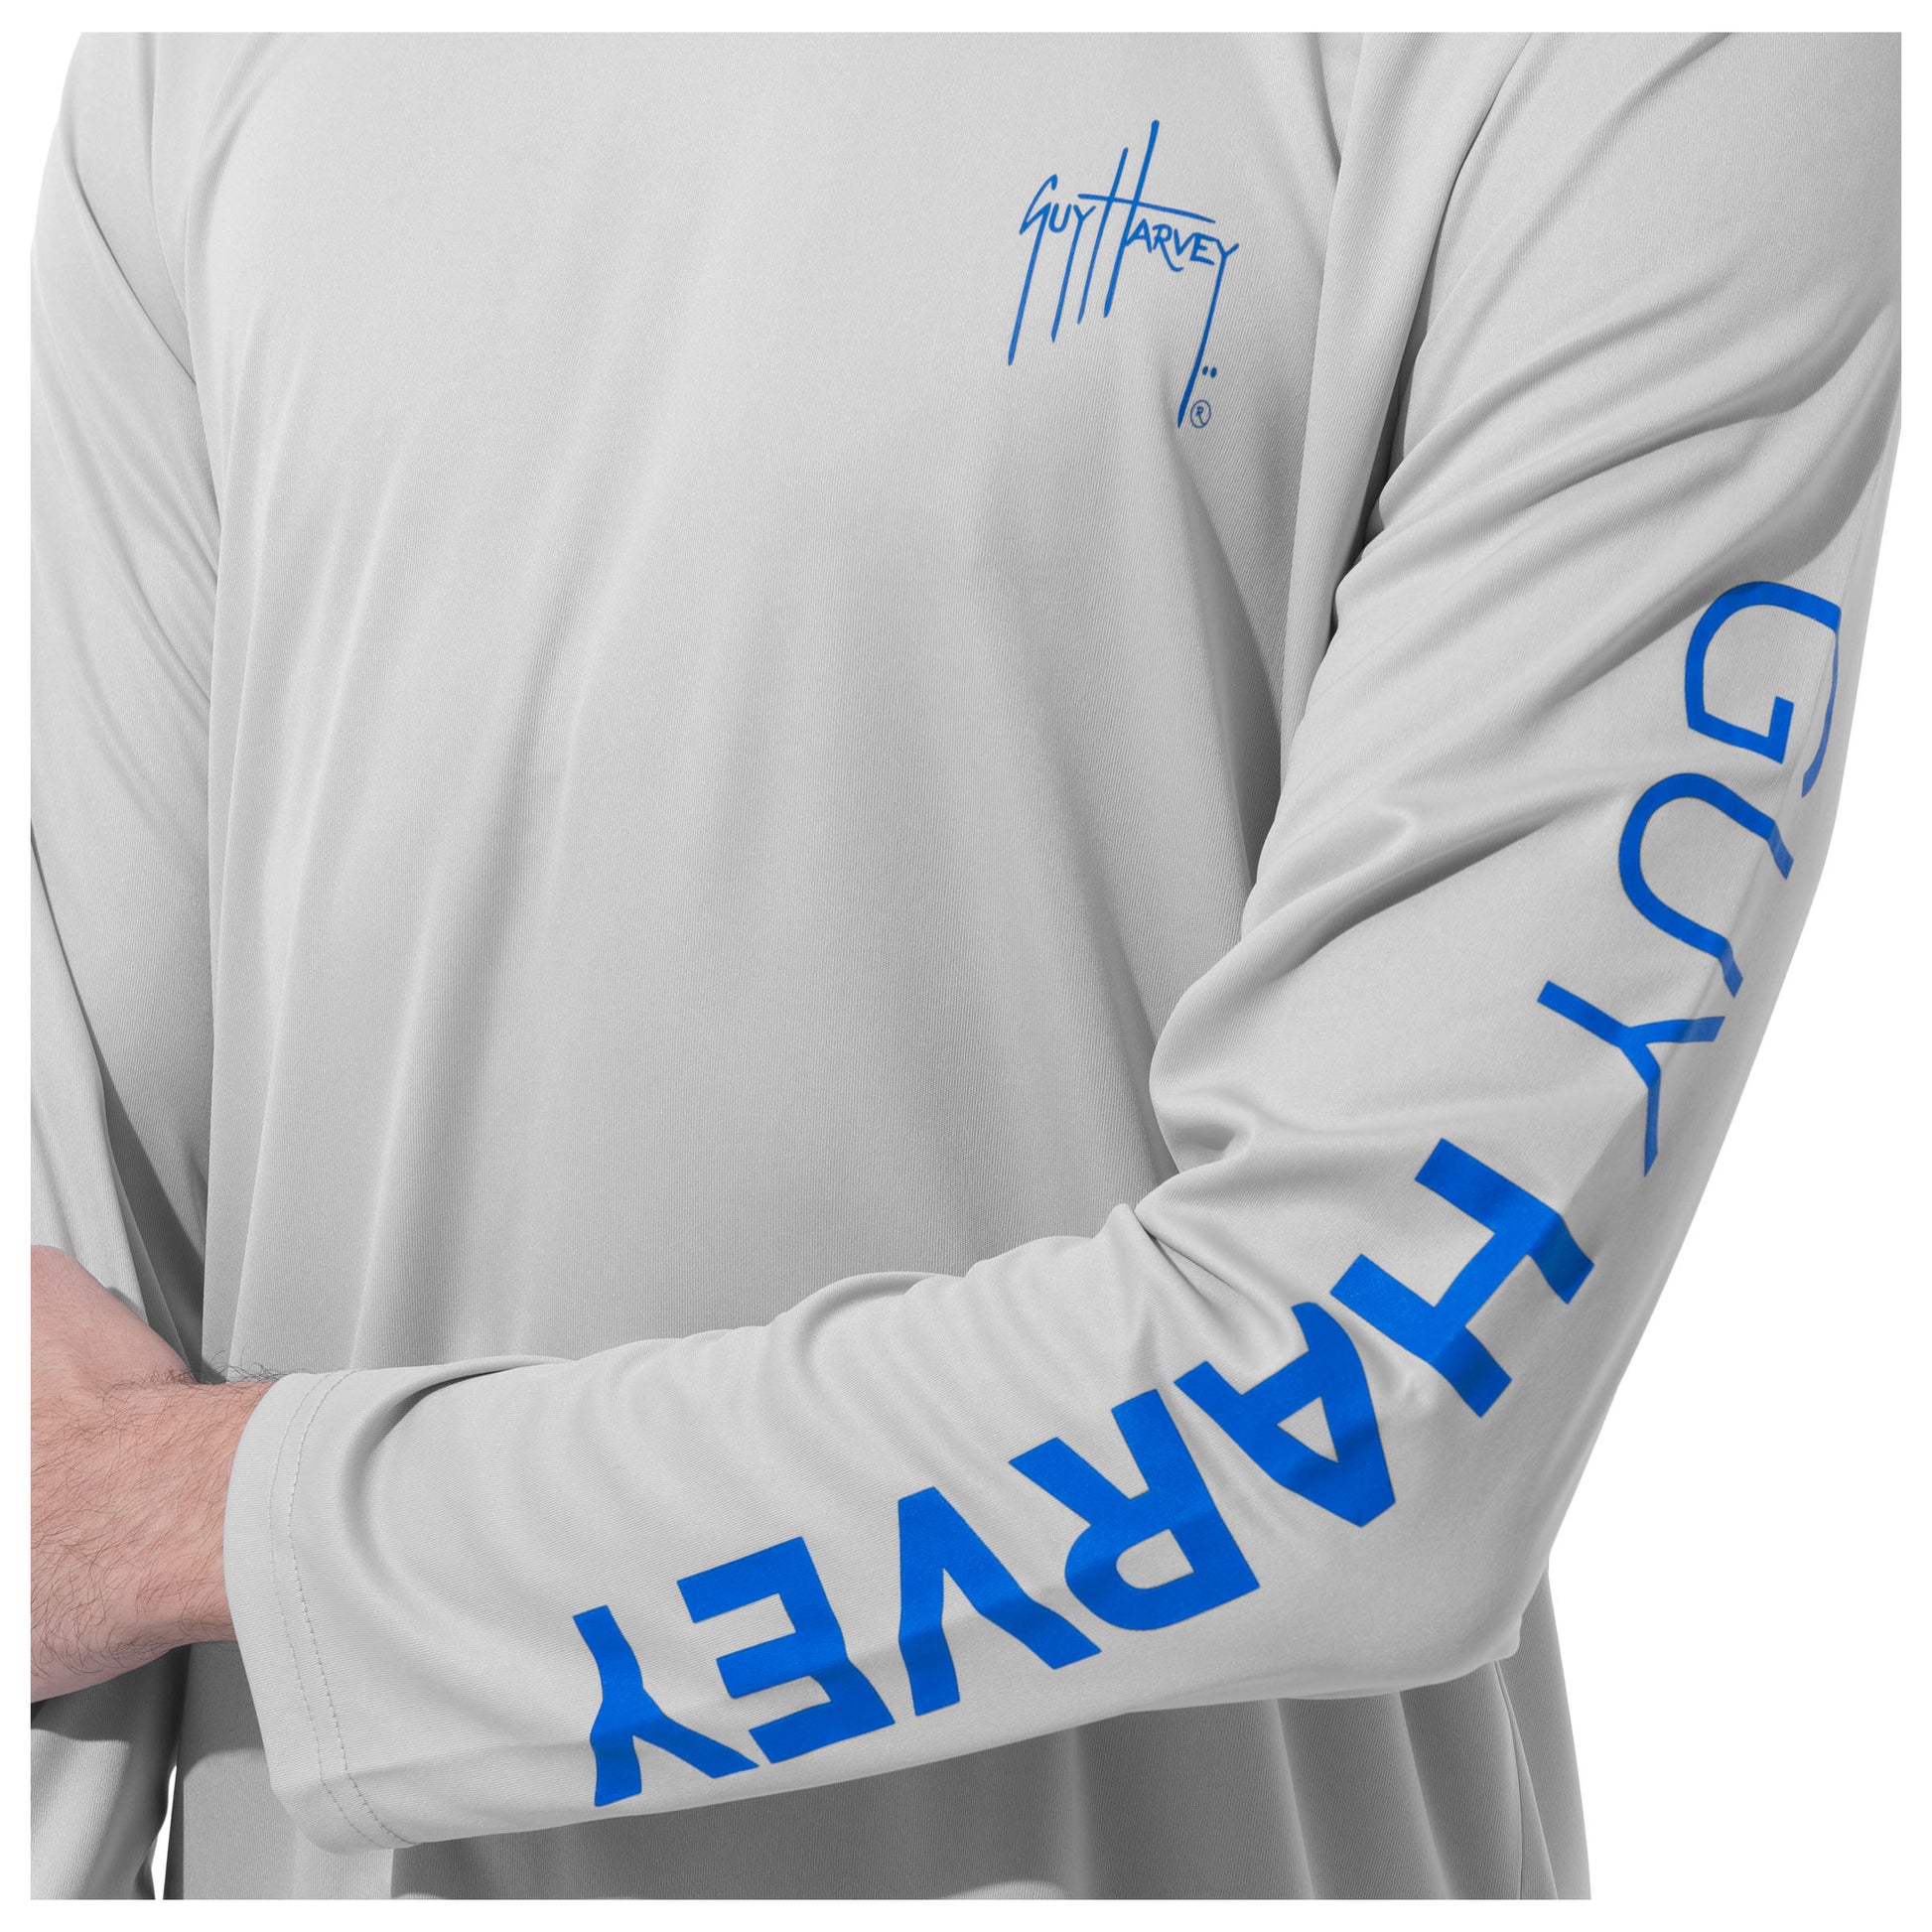 Men Long Sleeve Performance Fishing Sun Protection with UPF 50 Plus. Color Grey Sleeve has Guy Harvey text